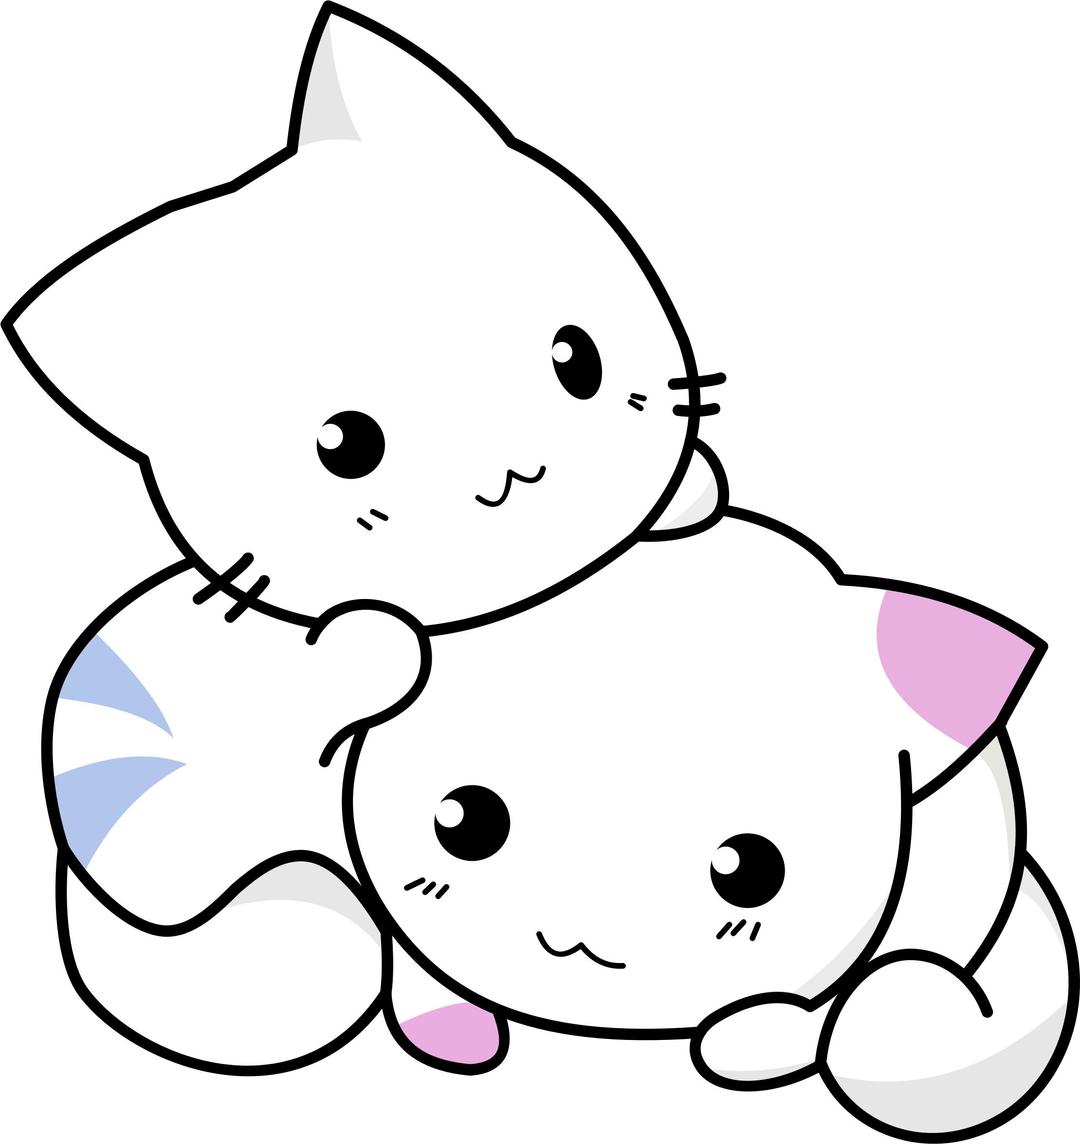 Cute Kittens Playing png transparent